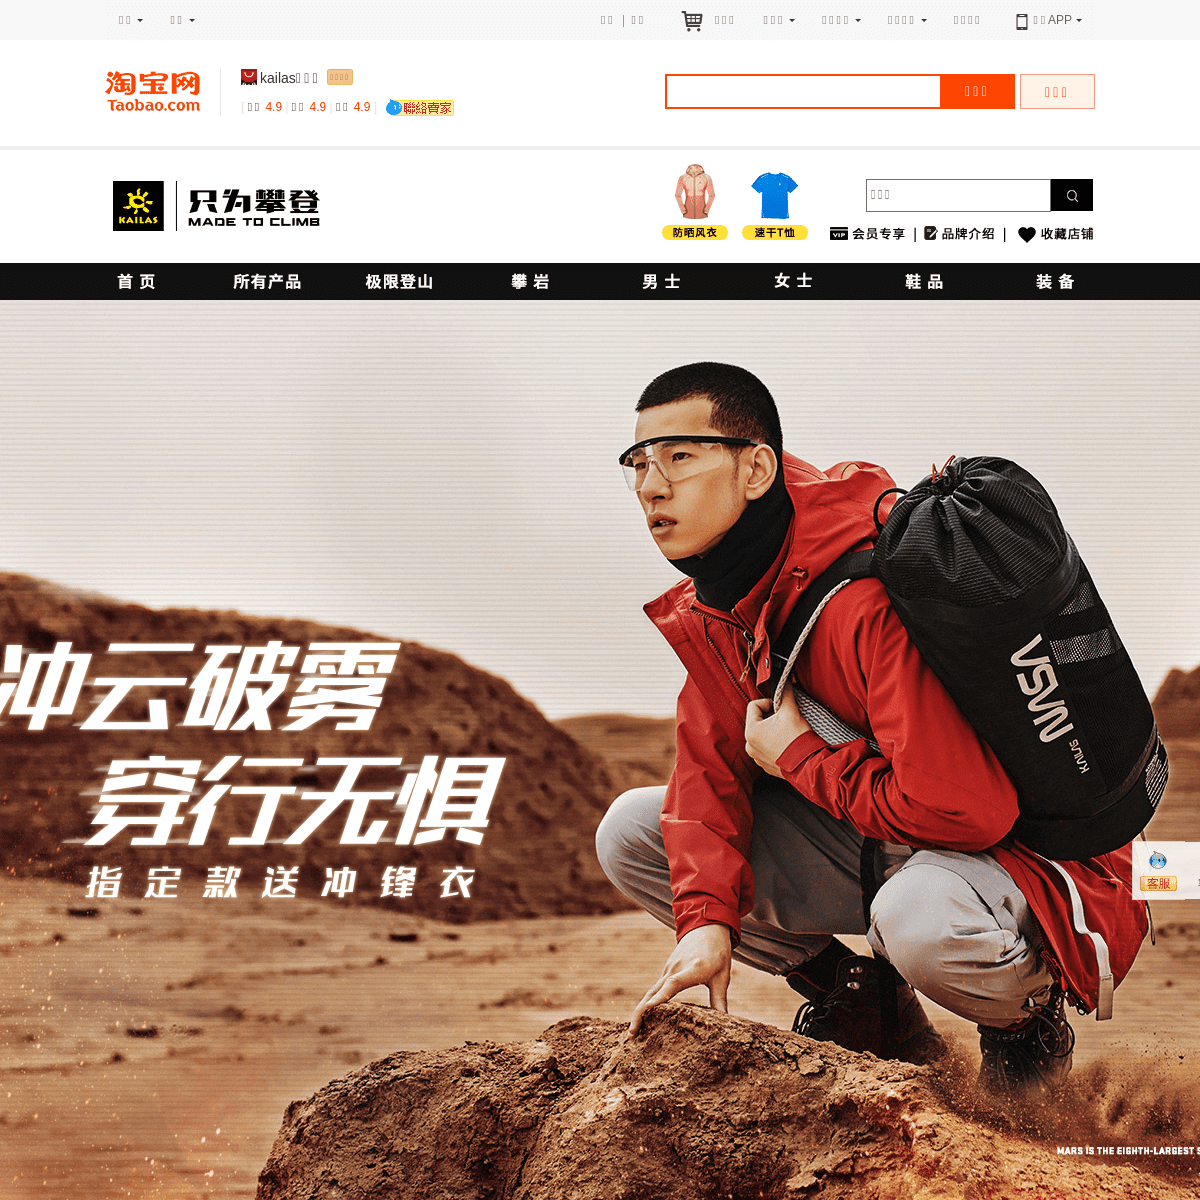 A complete backup of kailas.tmall.com